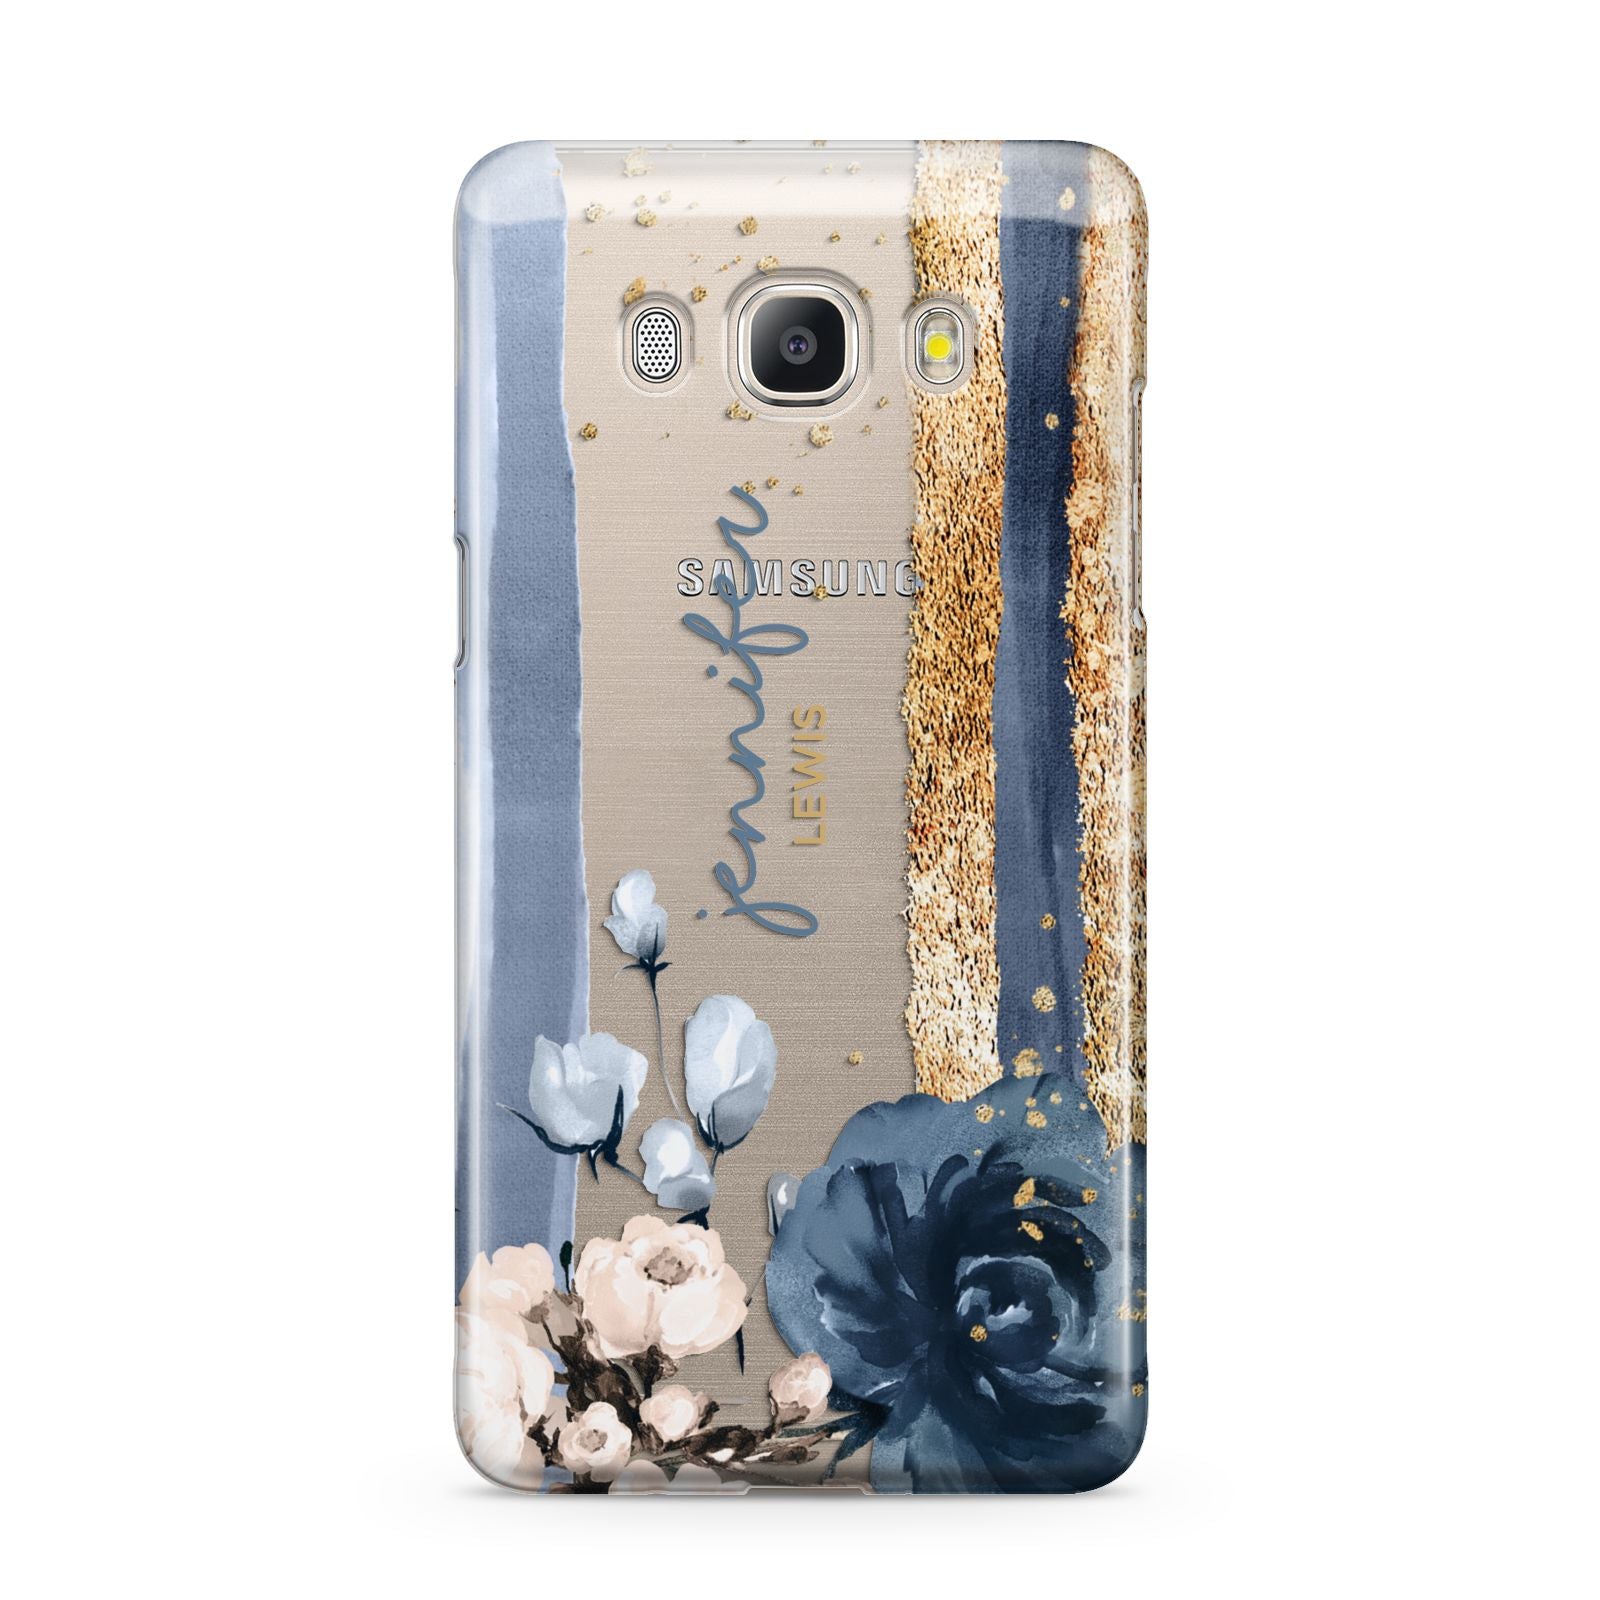 Personalised Blue Gold Name Samsung Galaxy J5 2016 Case